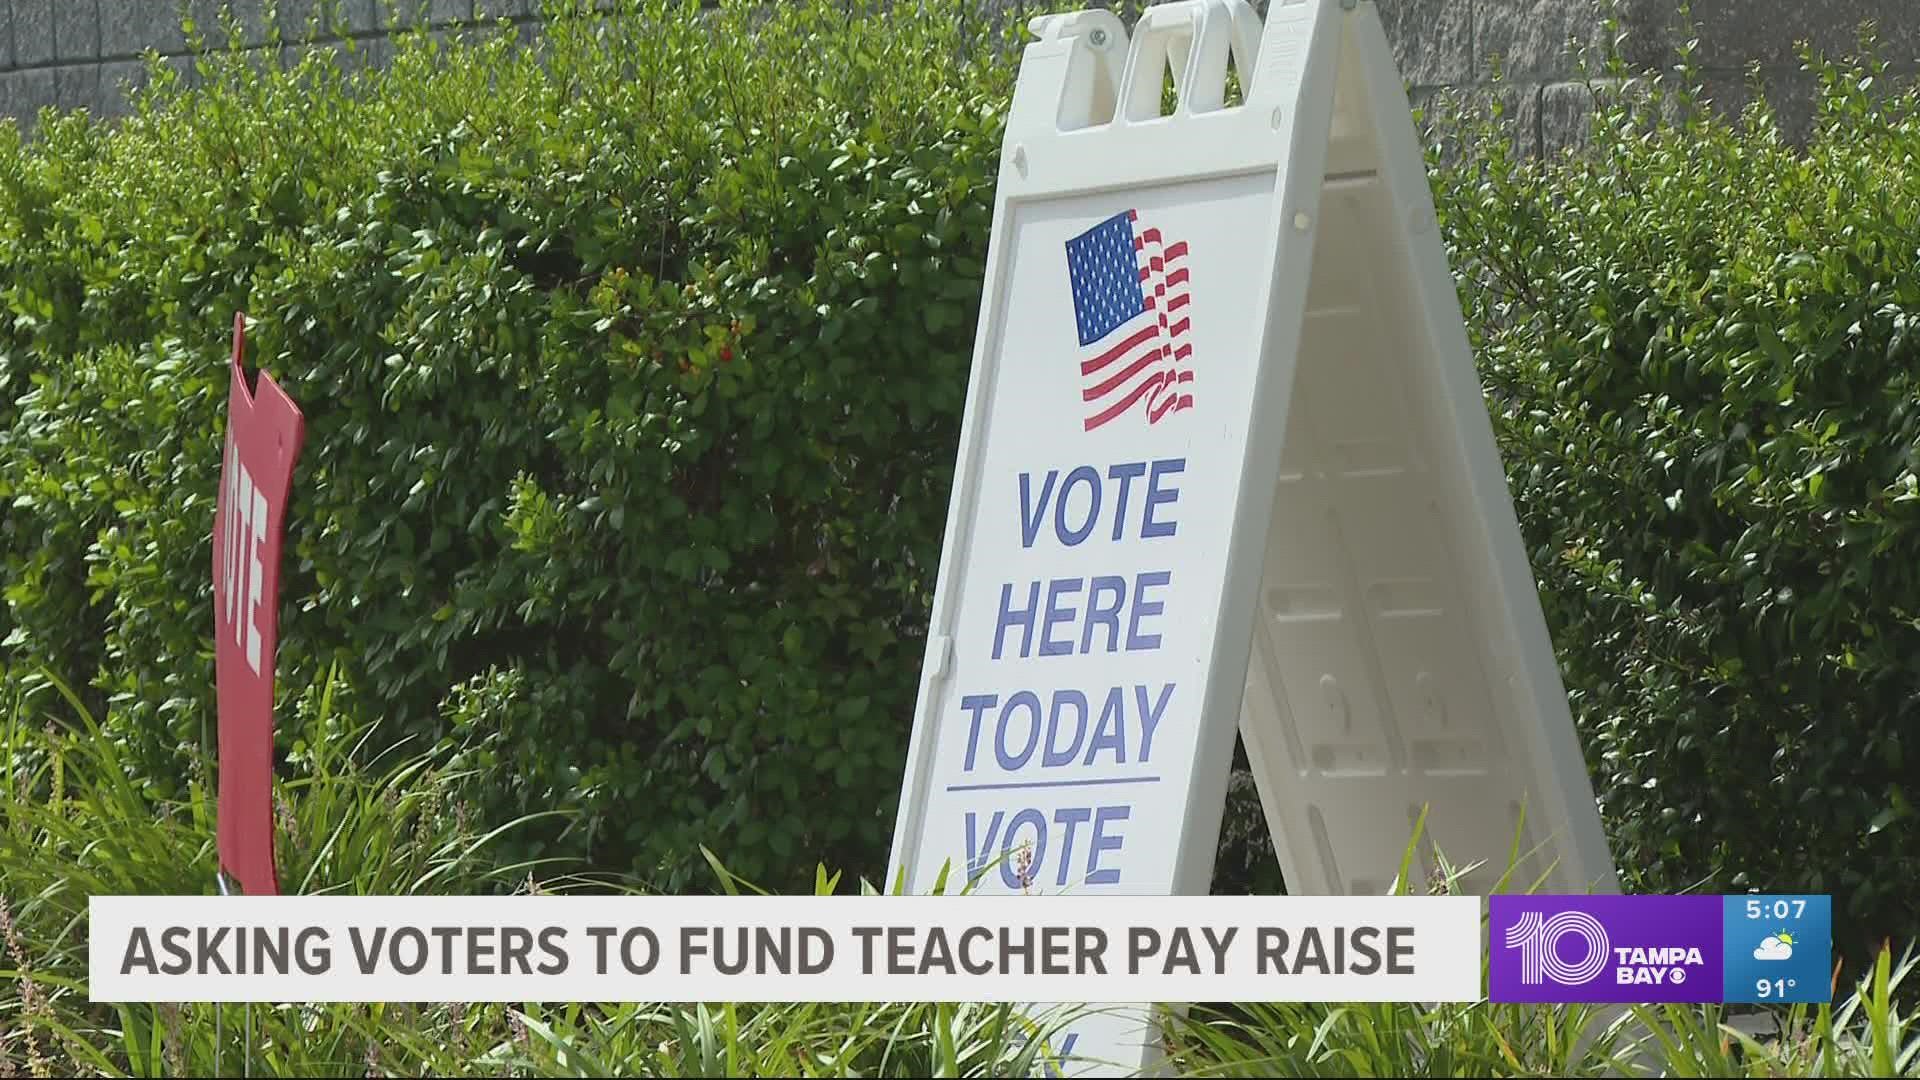 On Tuesday, Hillsborough County voters can weigh in on a referendum that would generate around $146 million annually for public schools.